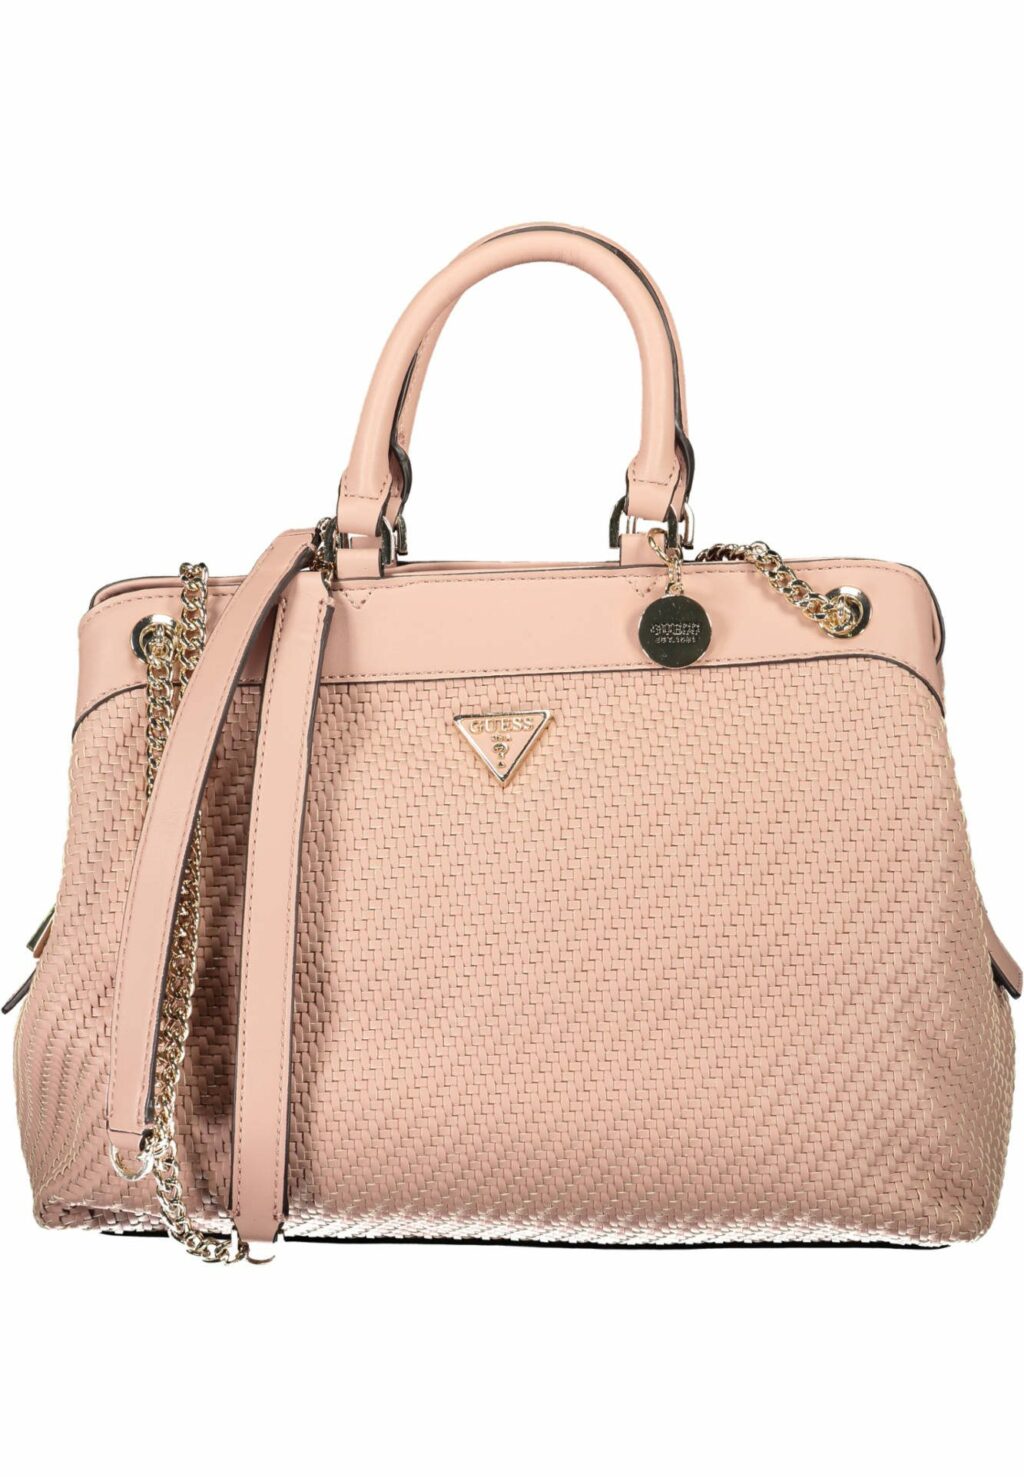 GUESS JEANS WOMEN'S BAG PINK VG839723_ROSA_ROSEWOOD